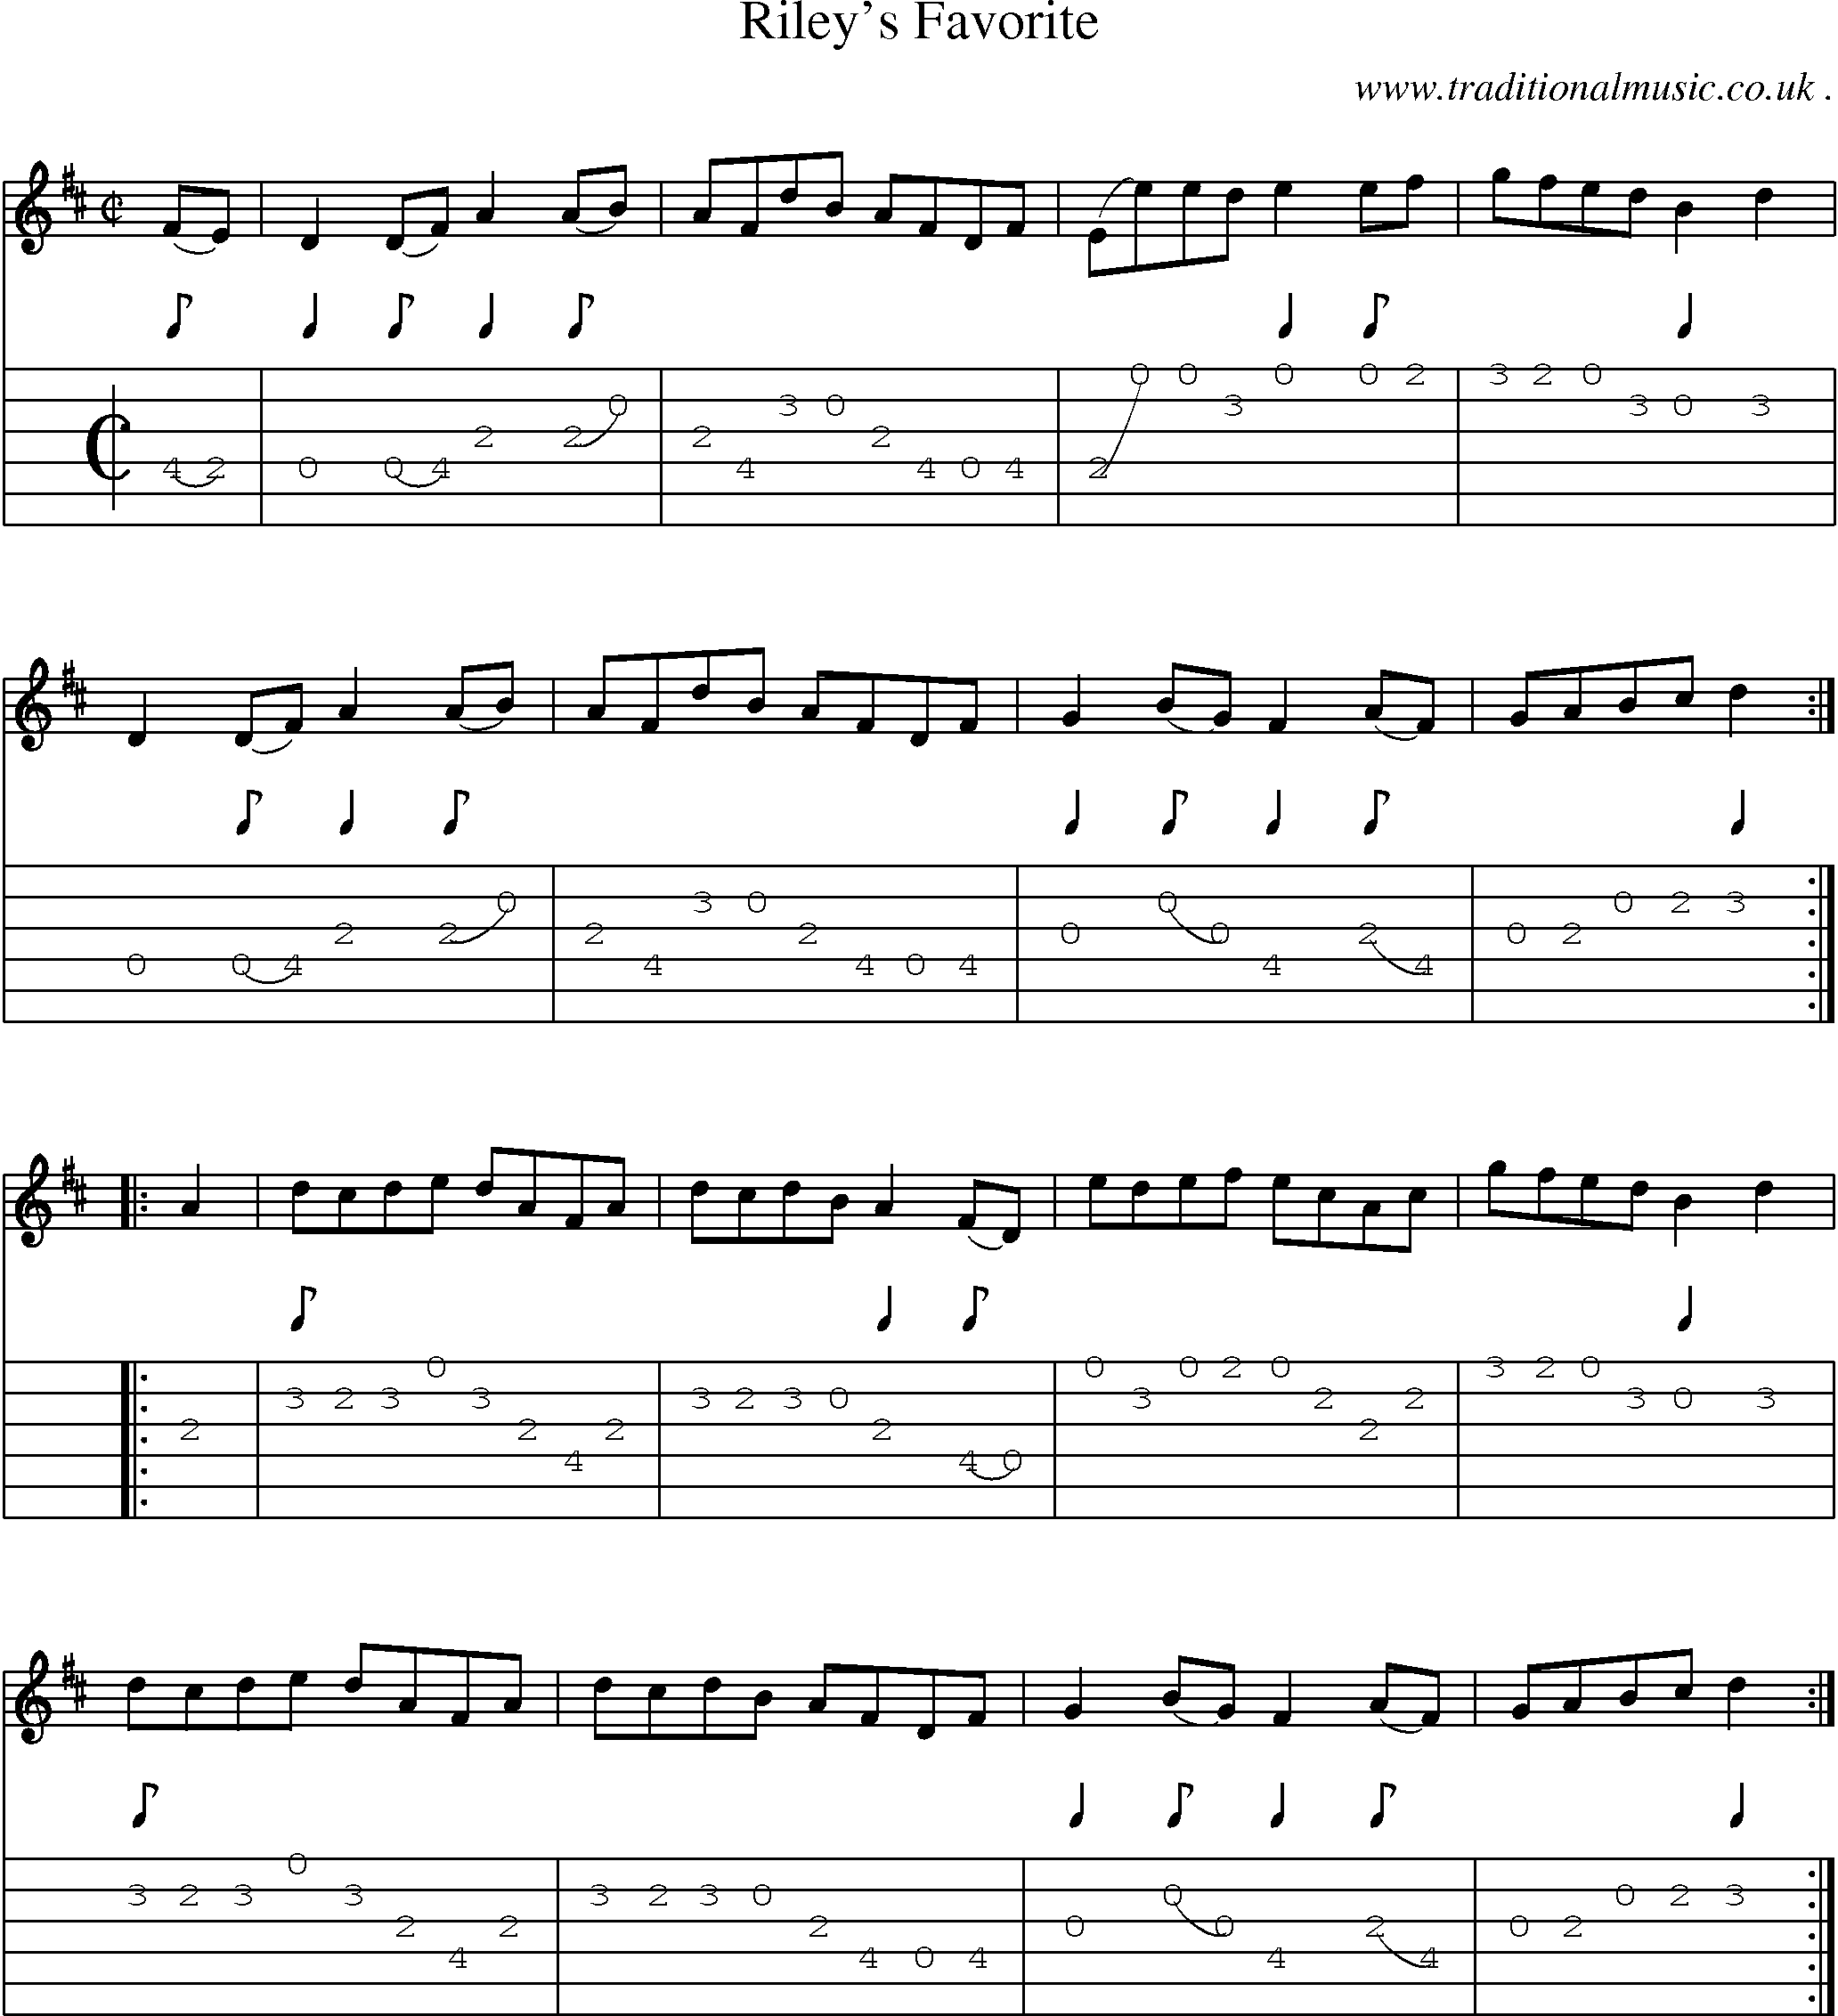 Sheet-Music and Guitar Tabs for Rileys Favorite